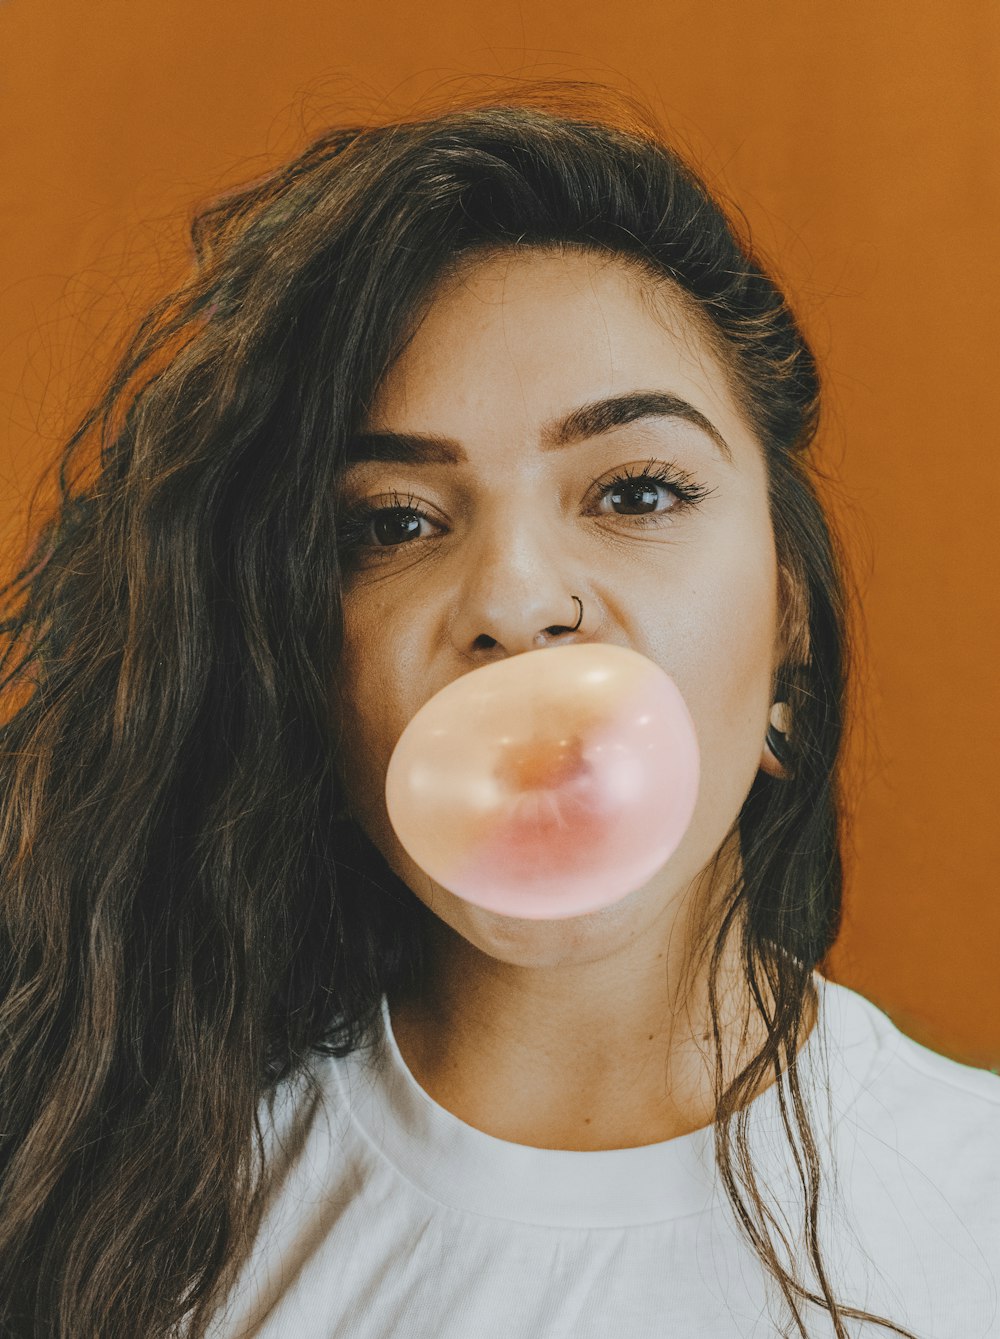 woman in white crew neck shirt blowing bubble